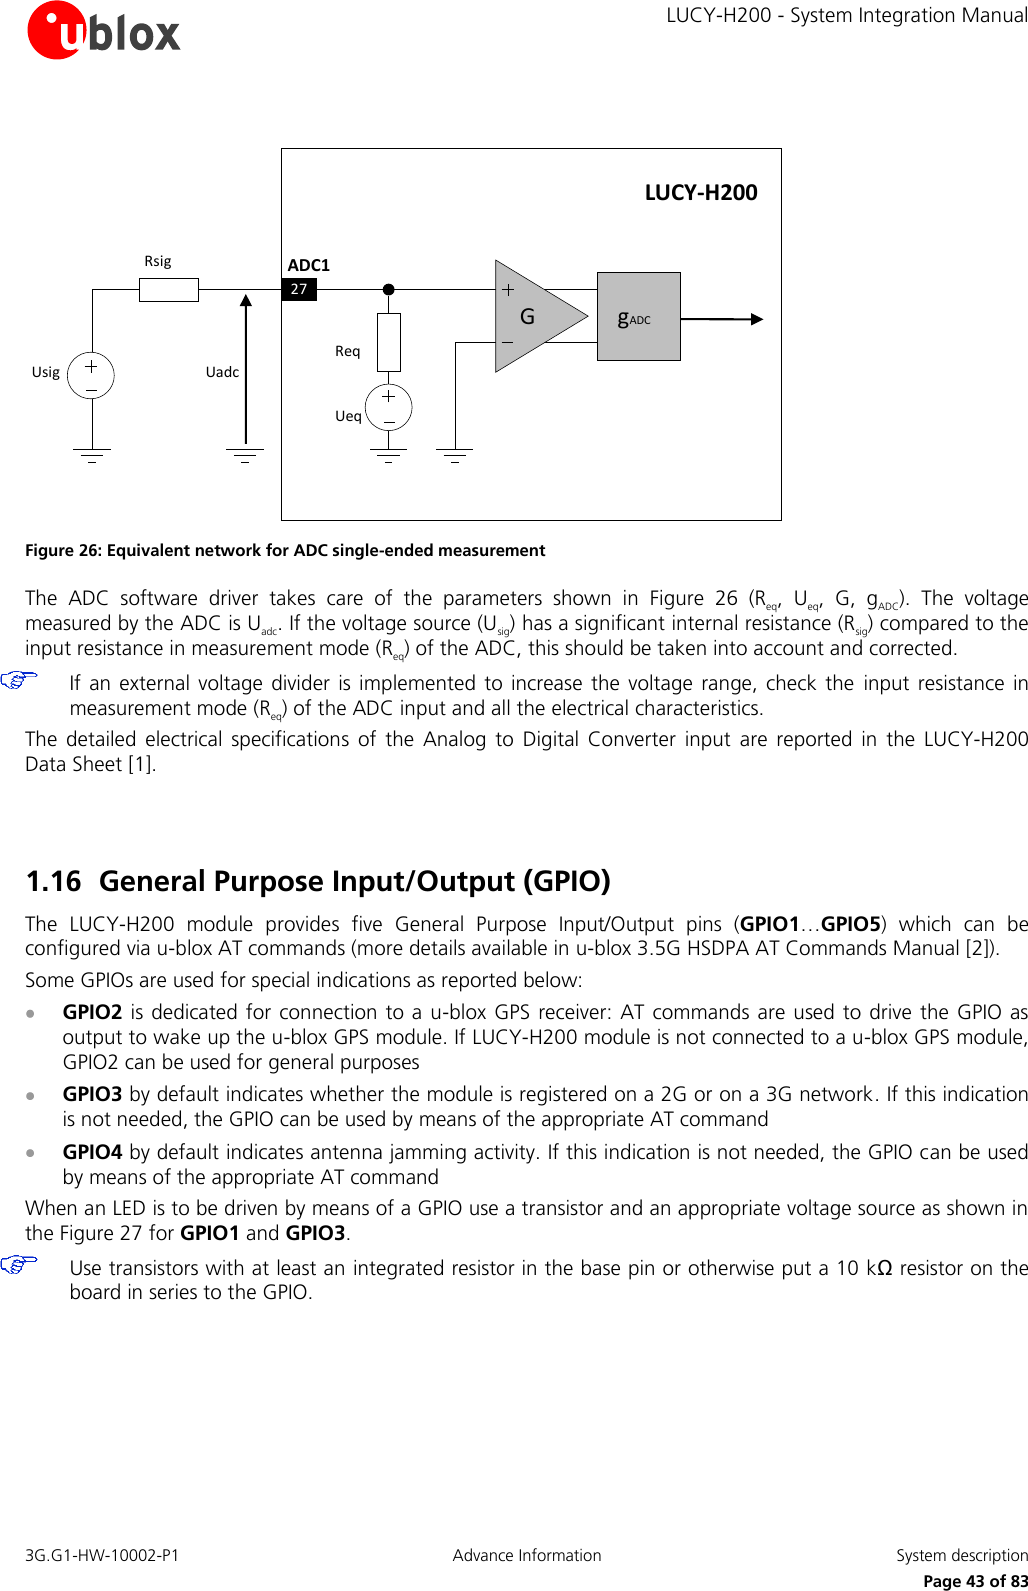     LUCY-H200 - System Integration Manual 3G.G1-HW-10002-P1  Advance Information  System description      Page 43 of 83 LUCY-H200ADC1UeqReqUsigRsigUadcG27gADC Figure 26: Equivalent network for ADC single-ended measurement The  ADC  software  driver  takes  care  of  the  parameters  shown  in  Figure  26 (Req,  Ueq,  G,  gADC).  The  voltage measured by the ADC is Uadc. If the voltage source (Usig) has a significant internal resistance (Rsig) compared to the input resistance in measurement mode (Req) of the ADC, this should be taken into account and corrected.   If an external voltage  divider  is implemented  to increase the  voltage  range, check  the  input resistance in measurement mode (Req) of the ADC input and all the electrical characteristics. The  detailed  electrical  specifications  of  the  Analog  to  Digital  Converter  input  are  reported  in  the  LUCY-H200 Data Sheet [1].   1.16 General Purpose Input/Output (GPIO) The  LUCY-H200  module  provides  five  General  Purpose  Input/Output  pins  (GPIO1…GPIO5)  which  can  be configured via u-blox AT commands (more details available in u-blox 3.5G HSDPA AT Commands Manual [2]). Some GPIOs are used for special indications as reported below:  GPIO2 is dedicated for connection to a u-blox GPS  receiver: AT commands are used to drive the GPIO as output to wake up the u-blox GPS module. If LUCY-H200 module is not connected to a u-blox GPS module, GPIO2 can be used for general purposes  GPIO3 by default indicates whether the module is registered on a 2G or on a 3G network. If this indication is not needed, the GPIO can be used by means of the appropriate AT command  GPIO4 by default indicates antenna jamming activity. If this indication is not needed, the GPIO can be used by means of the appropriate AT command When an LED is to be driven by means of a GPIO use a transistor and an appropriate voltage source as shown in the Figure 27 for GPIO1 and GPIO3.   Use transistors with at least an integrated resistor in the base pin or otherwise put a 10 kΩ resistor on the board in series to the GPIO.  